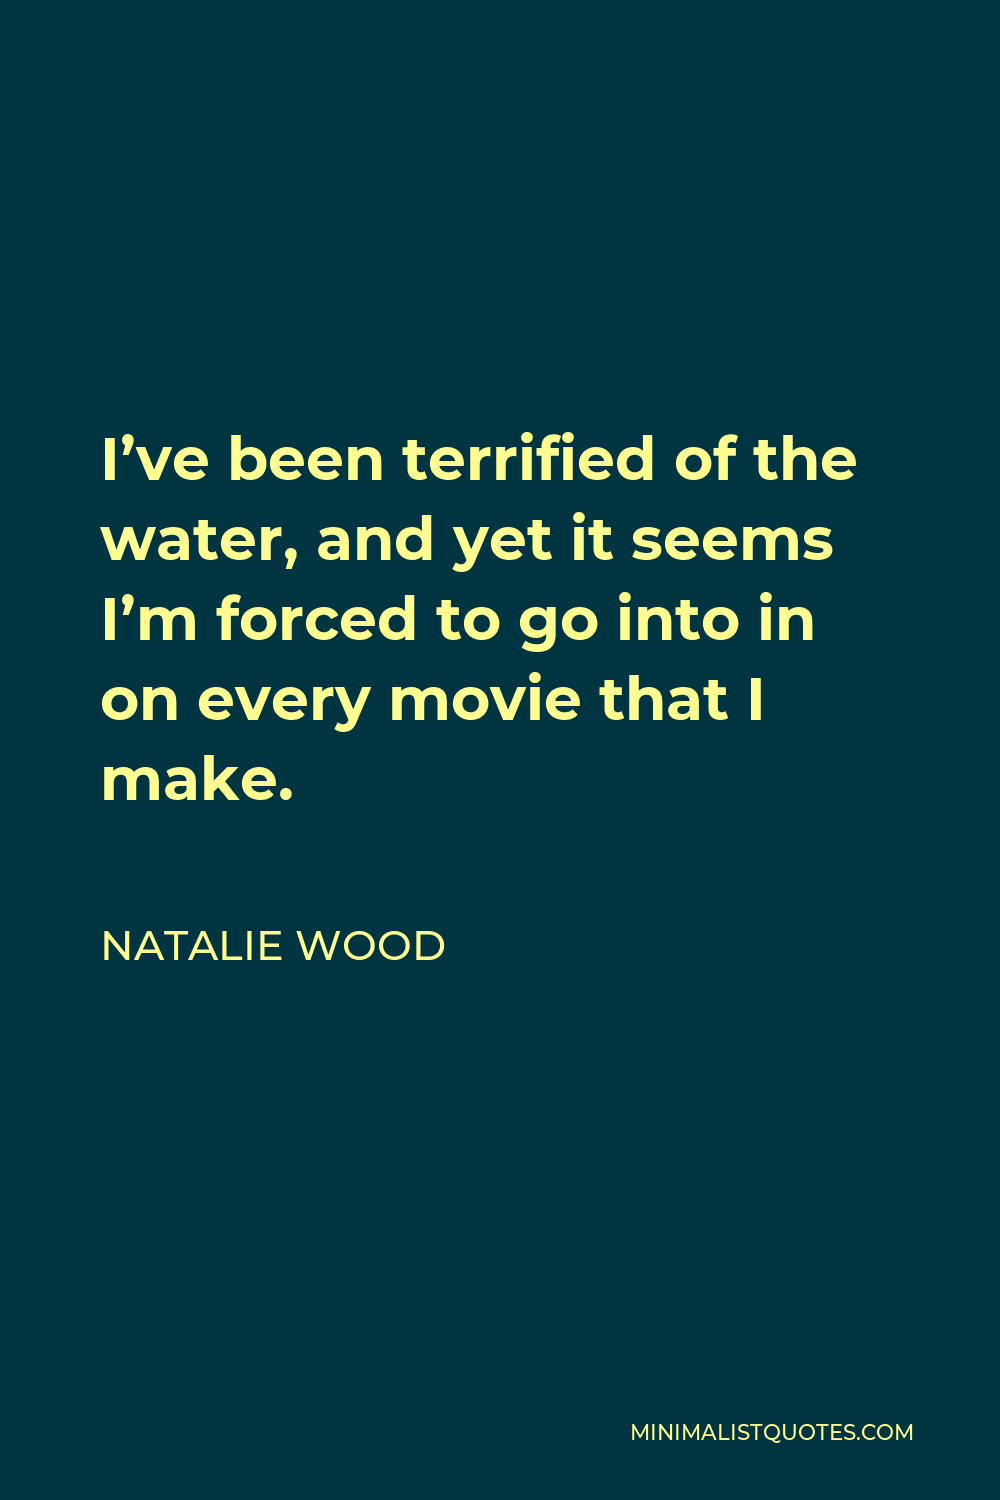 Natalie Wood Quote - I’ve been terrified of the water, and yet it seems I’m forced to go into in on every movie that I make.